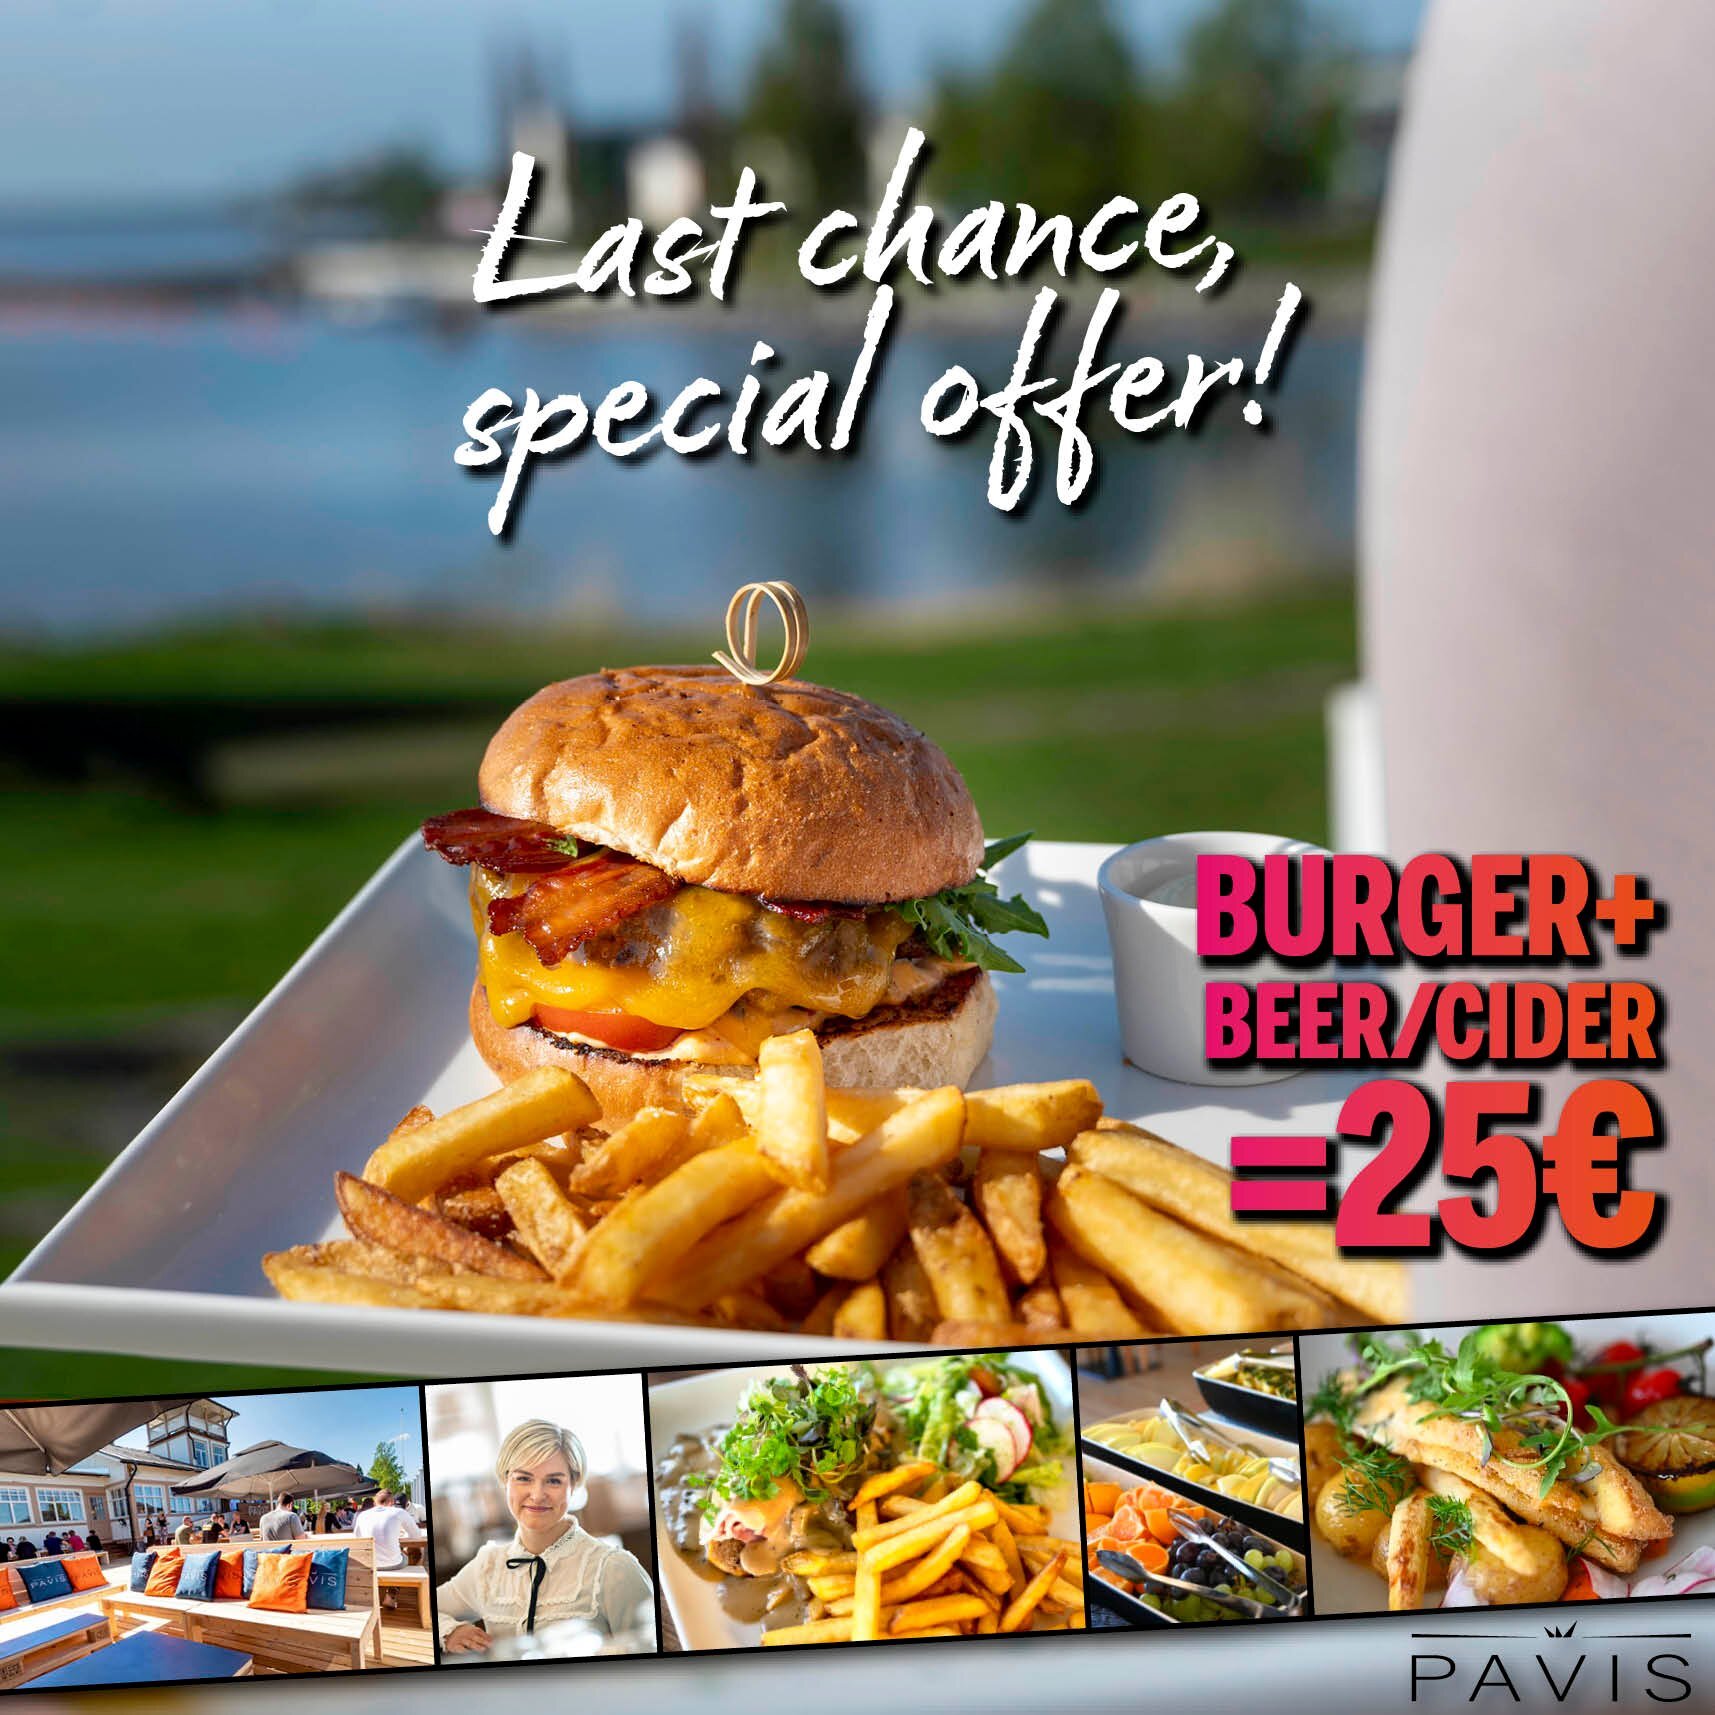 Last chance to grab this weeks special offer: House burger + beer/cider 25&euro;. We are open from 4pm to 11 pm! Welcome! 😊